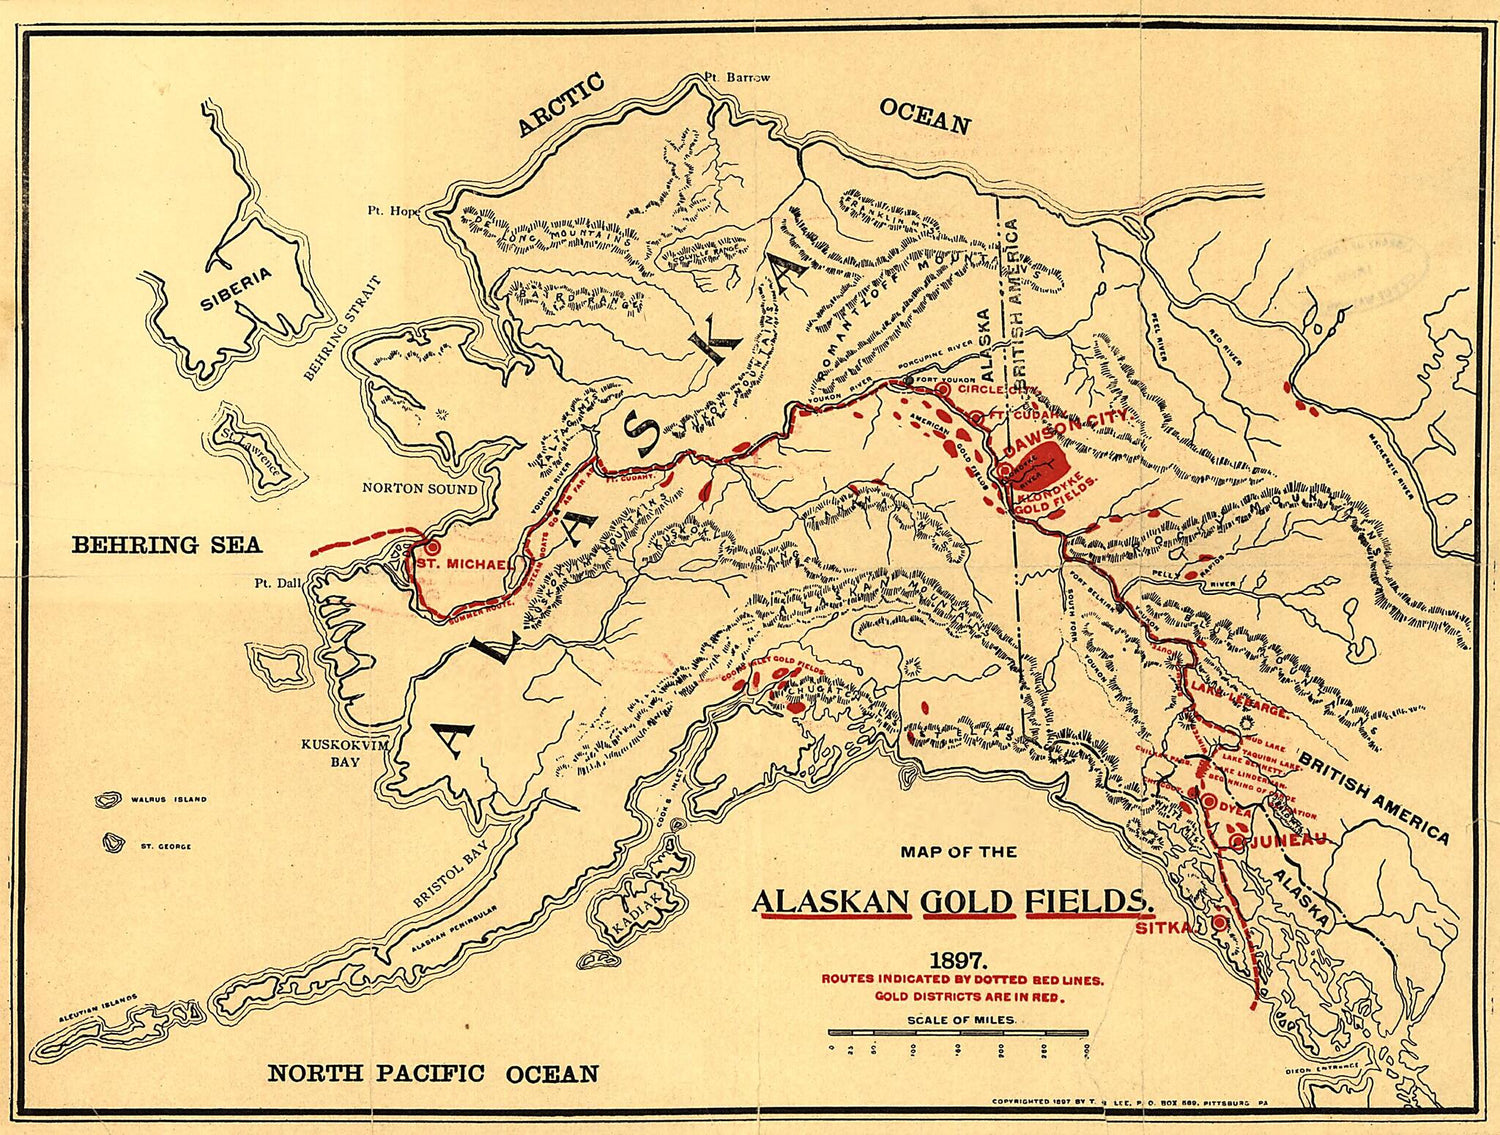 This old map of Map of the Alaskan Gold Fields from 1897 was created by T. S. Lee in 1897